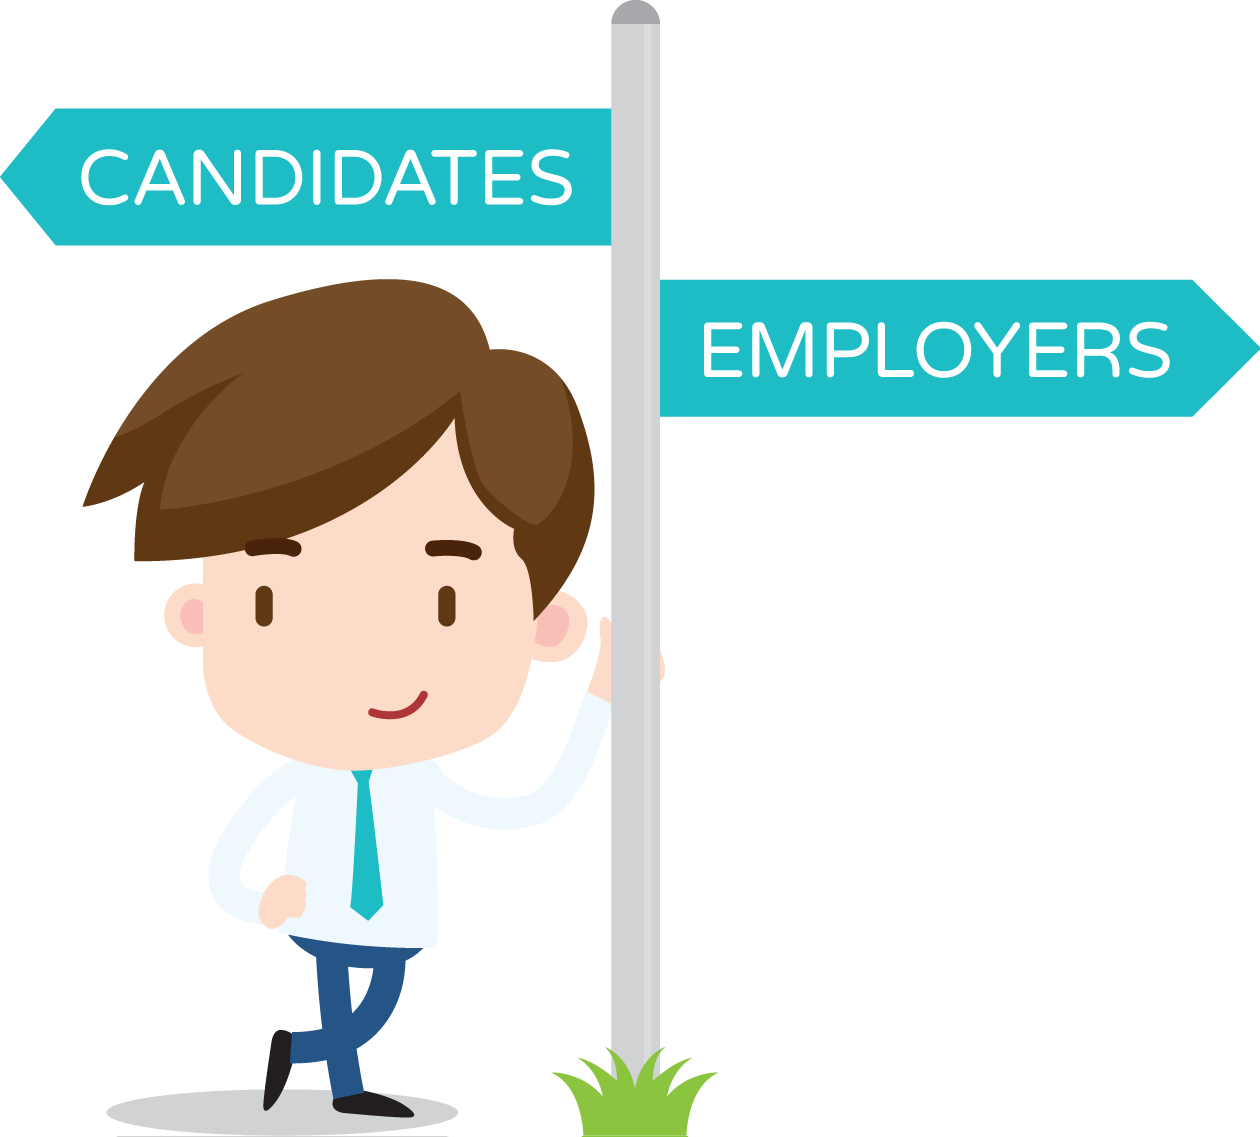 A cartoon character dressed in a suit, leaning up a signpost directing people to the candidates or employers sides of the website